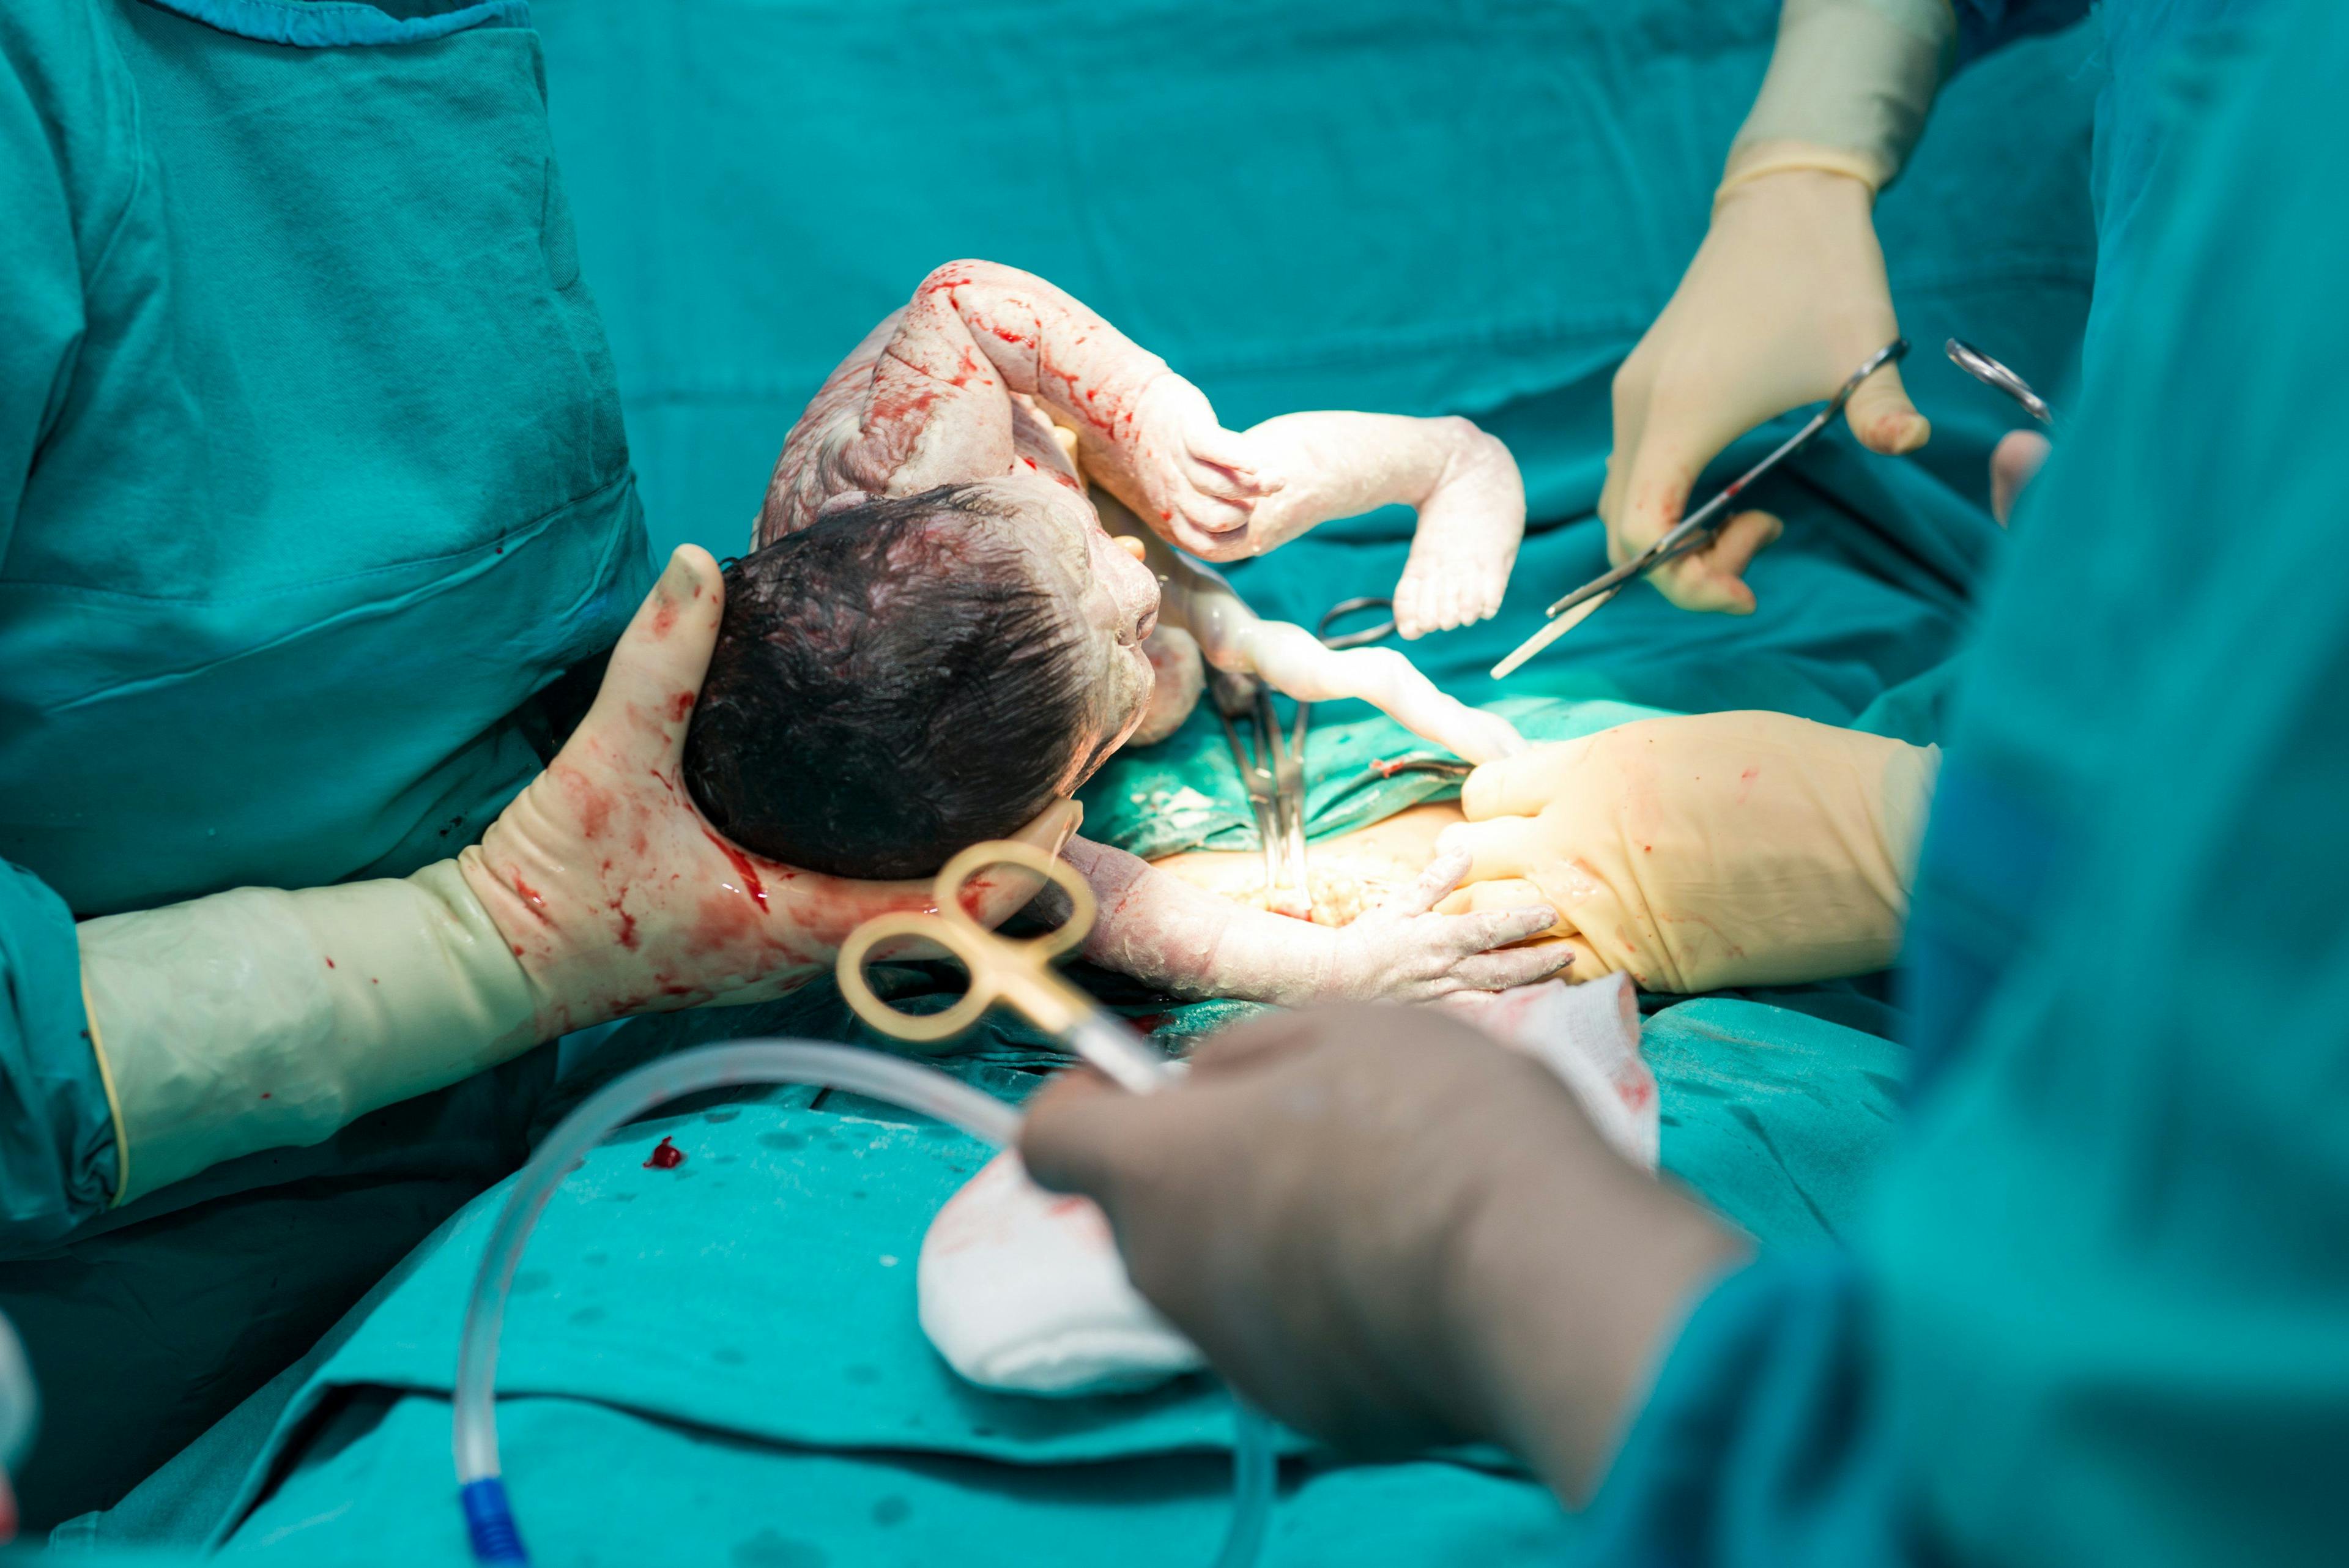 Being Born by Cesarean Increases Odds of Obesity and Diabetes 